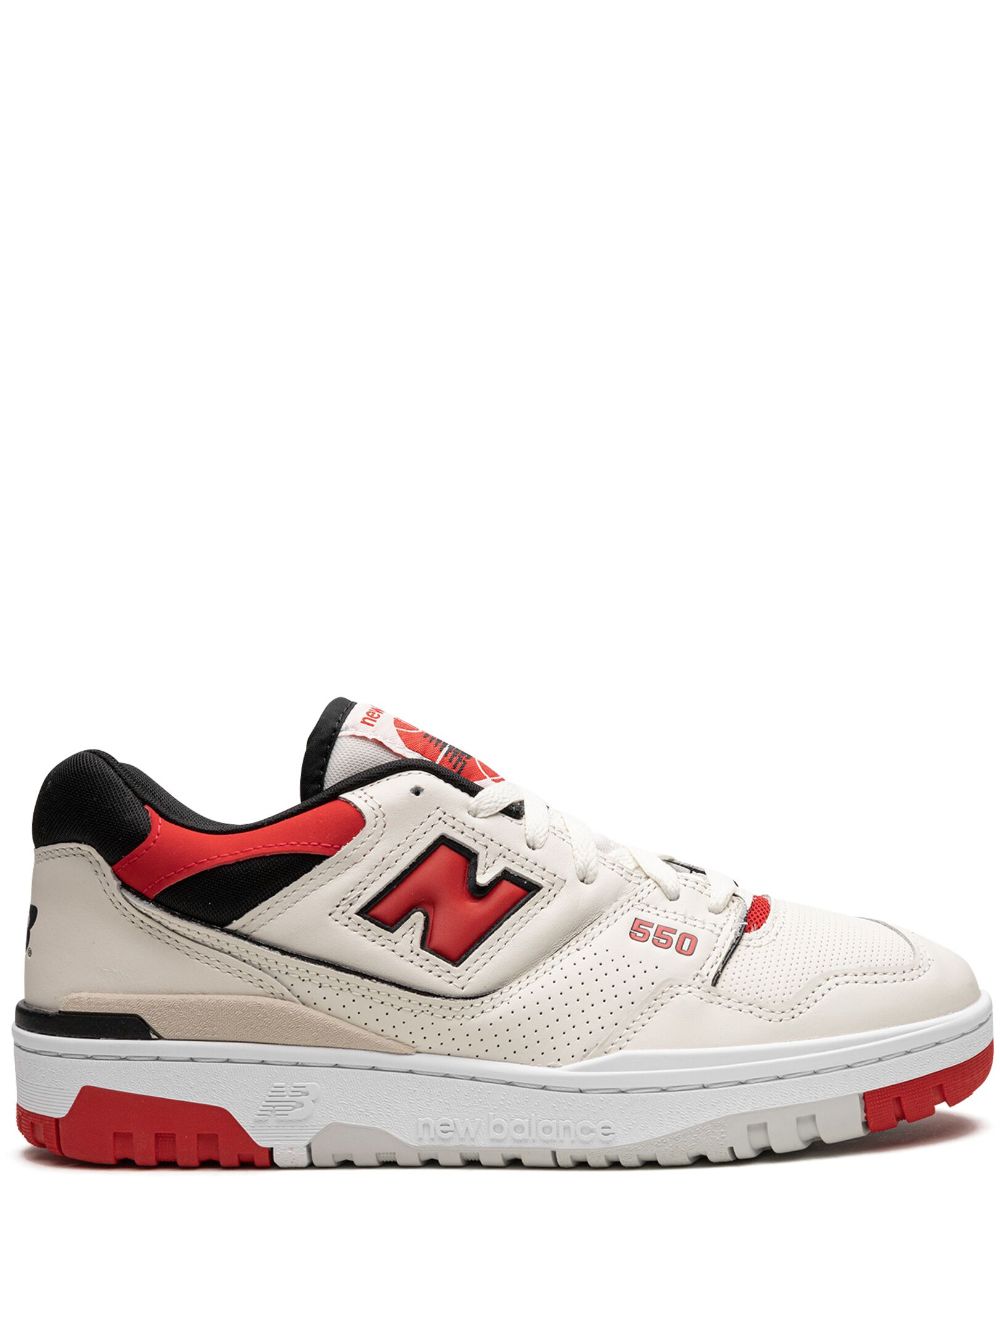 New Balance 550 "True Red" sneakers - Neutrals